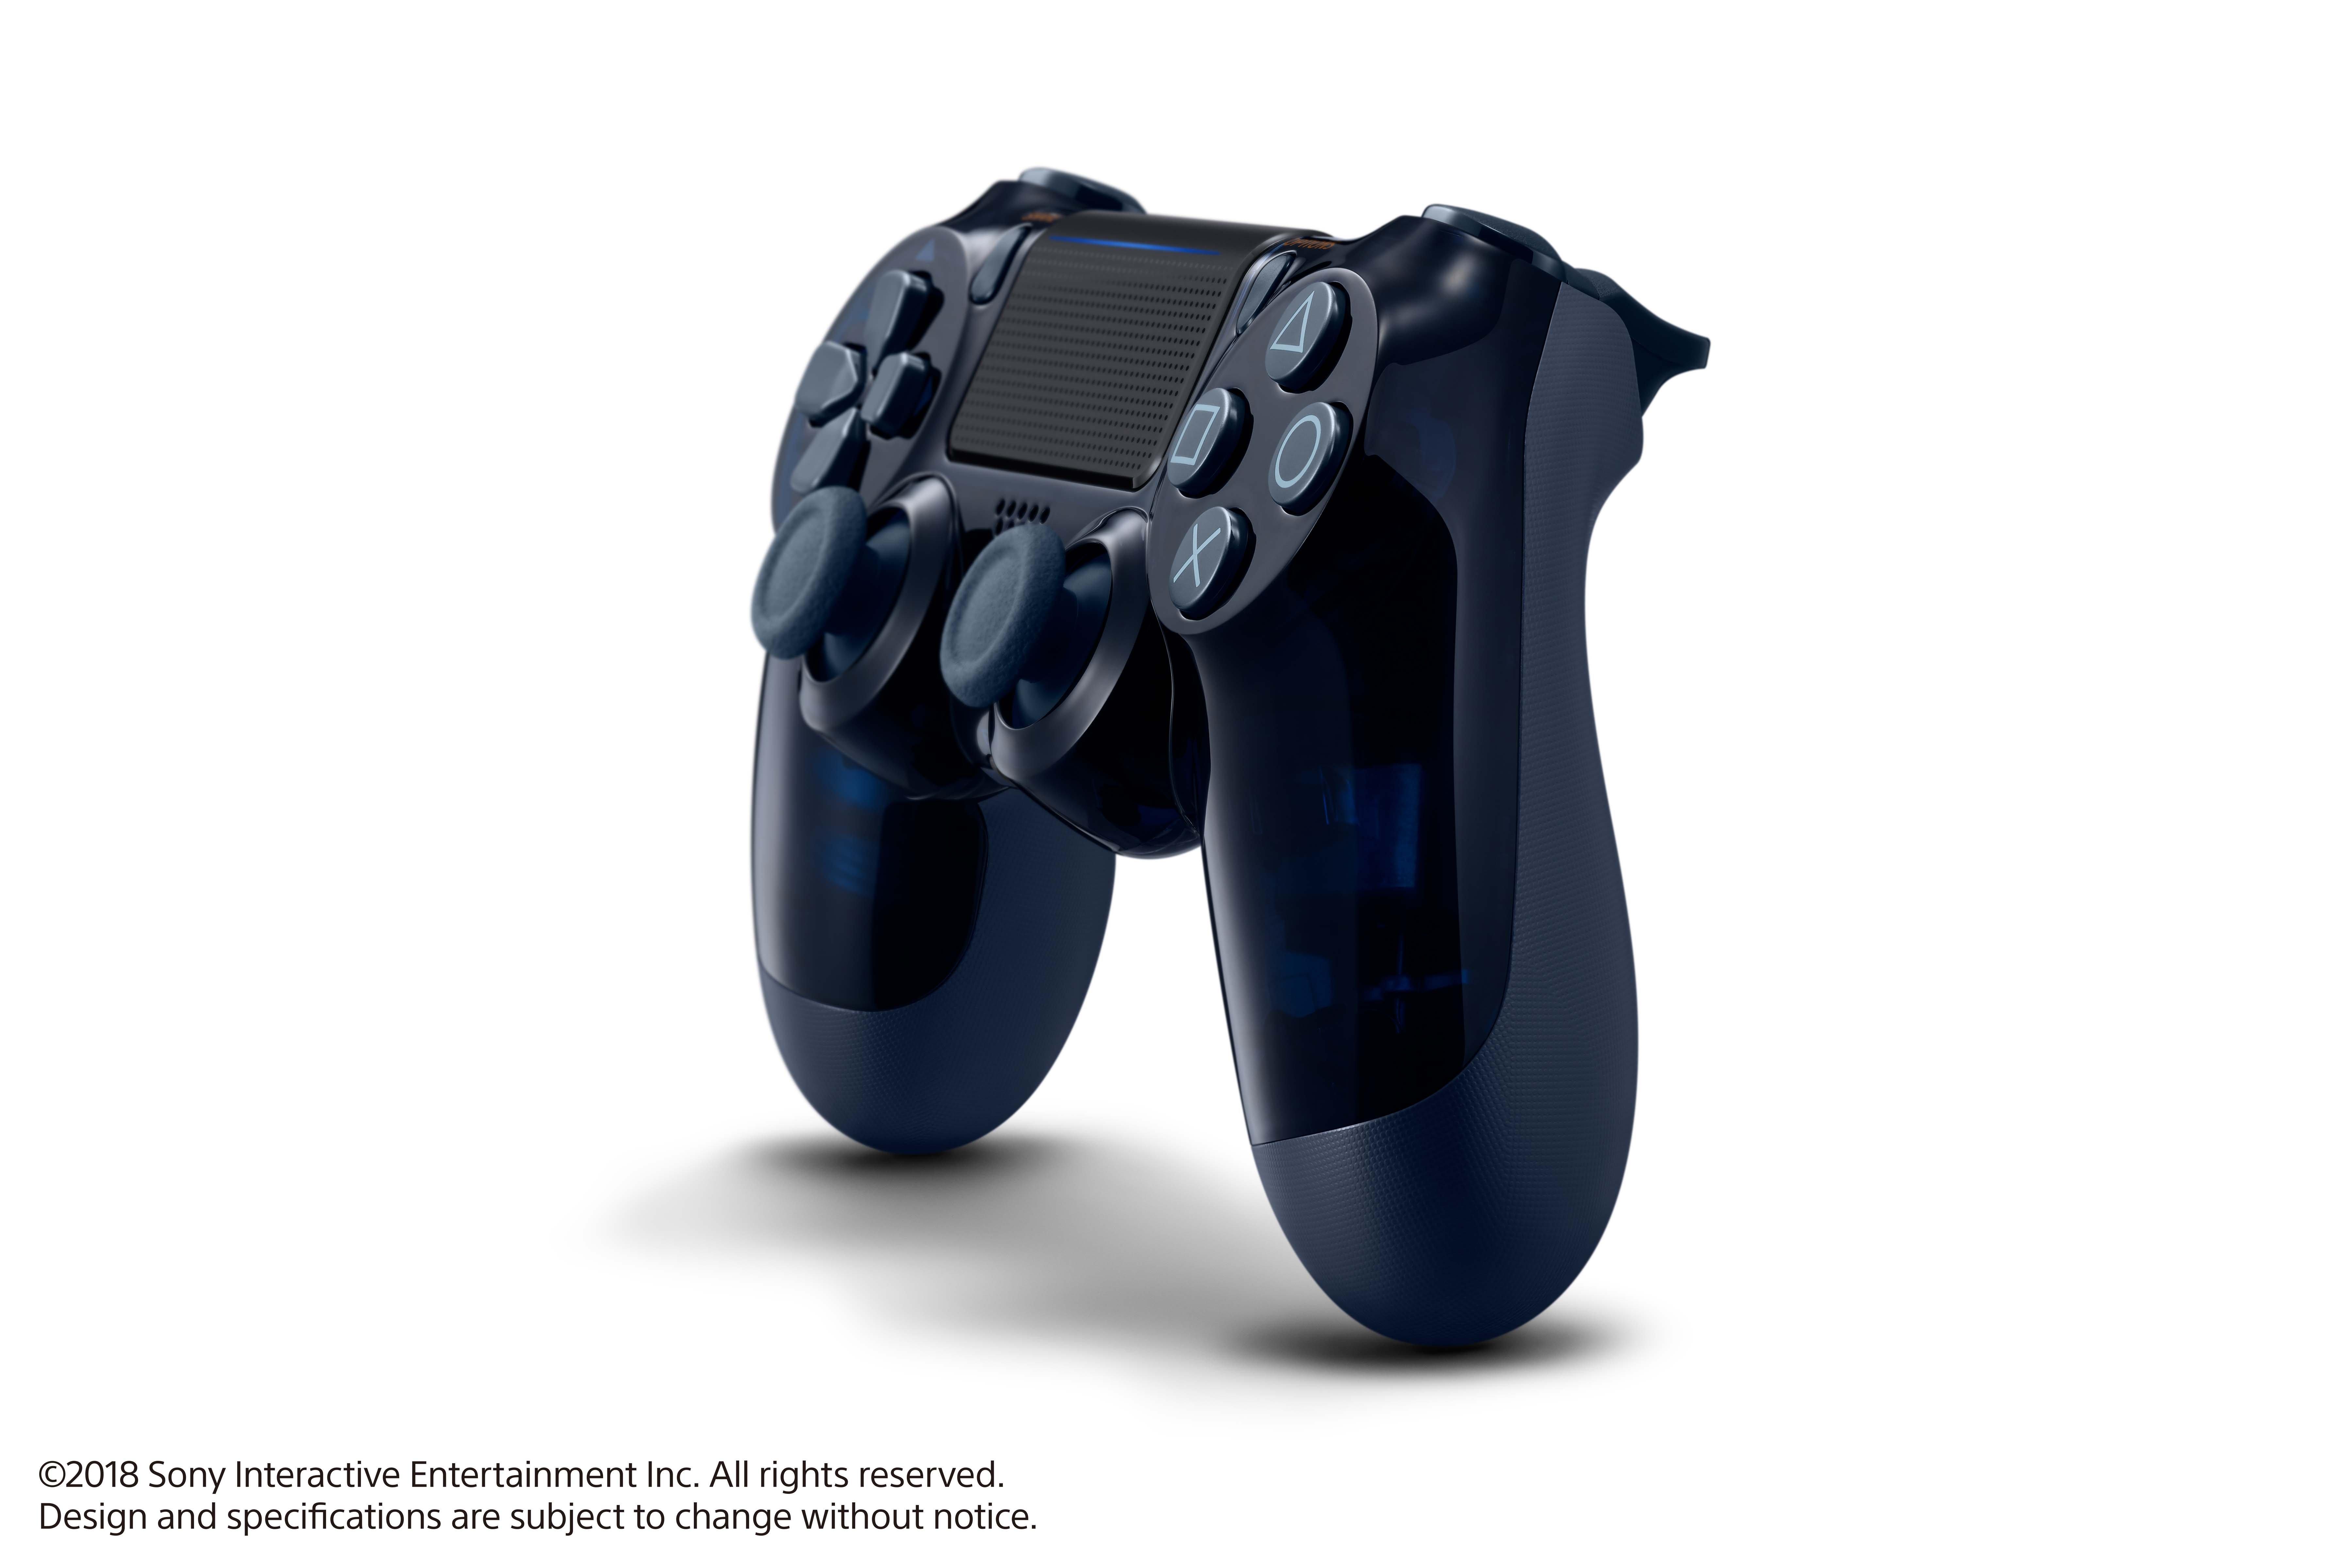 ps4 limited edition 500 million controller